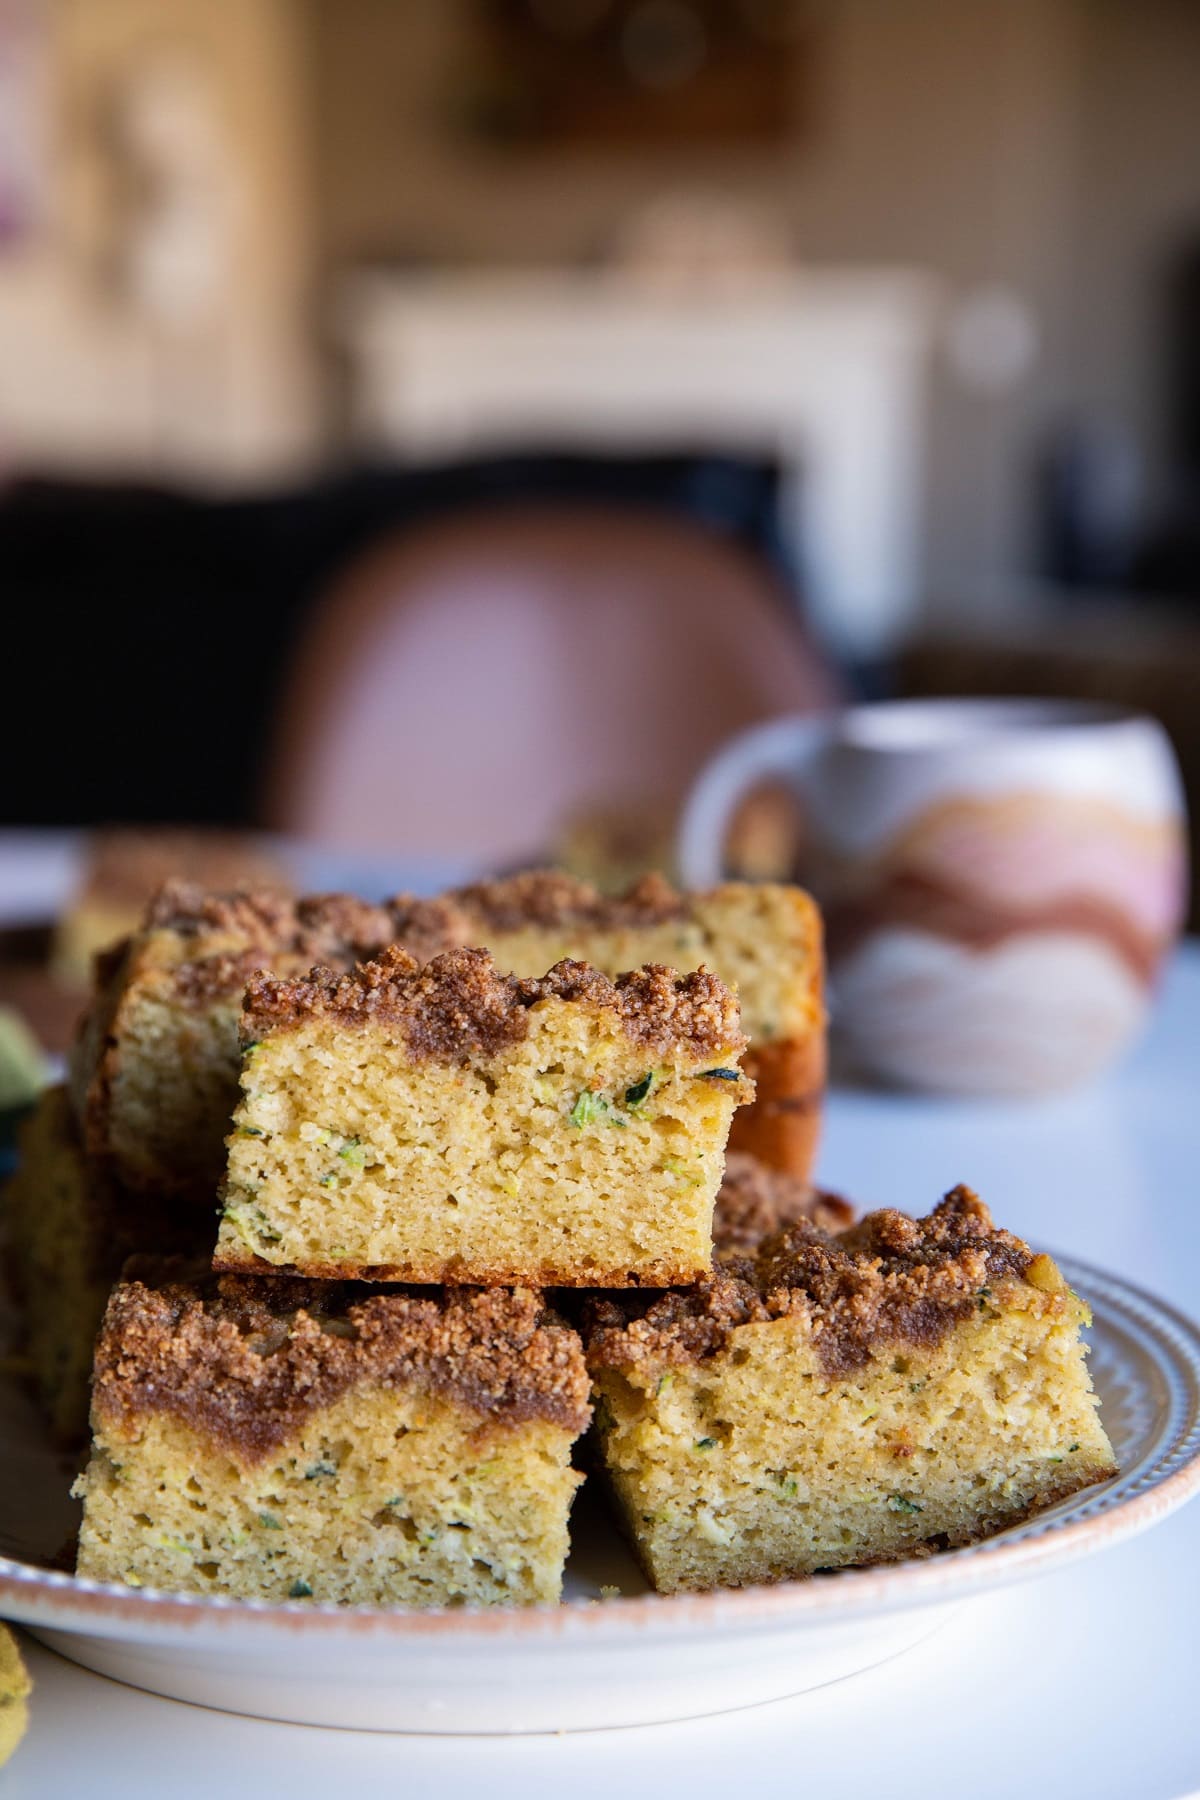 Plate of zucchini cake slices with a mug of tea in the background.